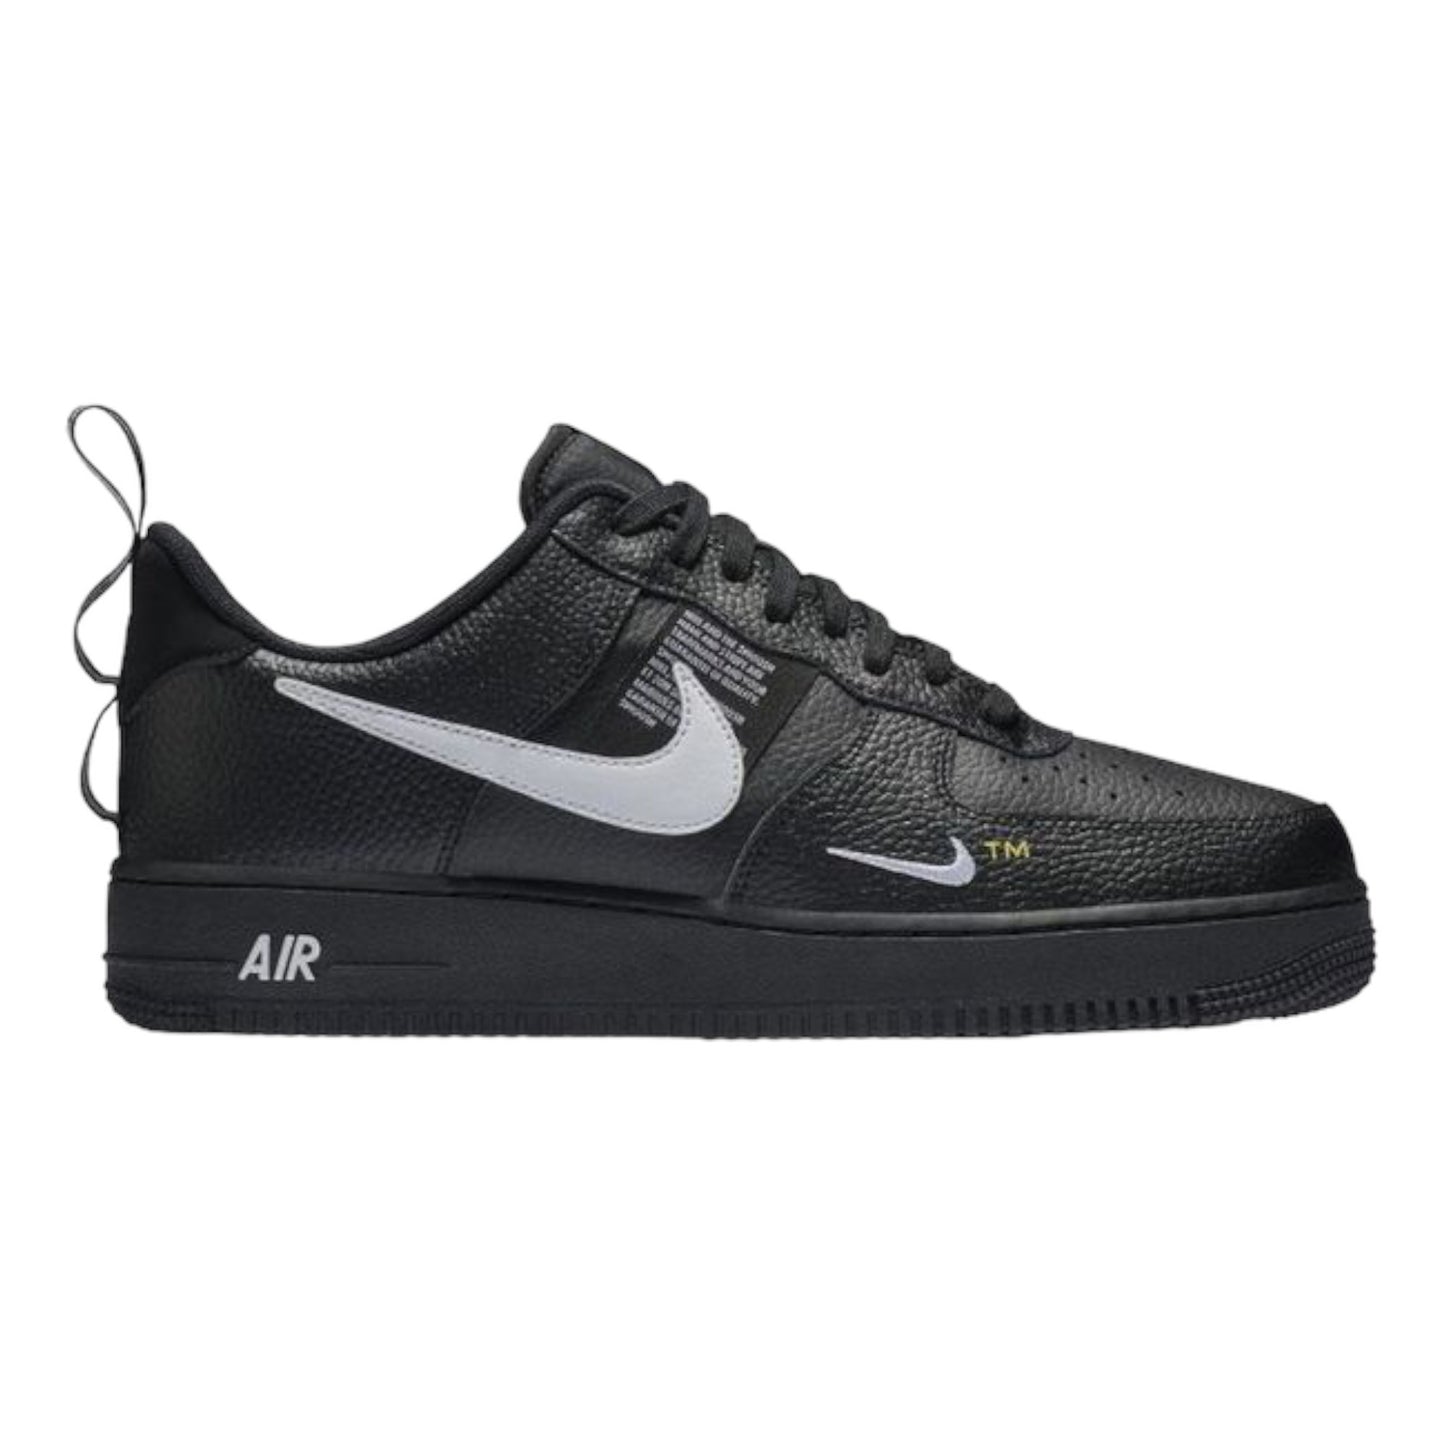 Air Force 1 black/white | airforce, new, nk, sneakers, View All- Shoes | SNEAKFIT